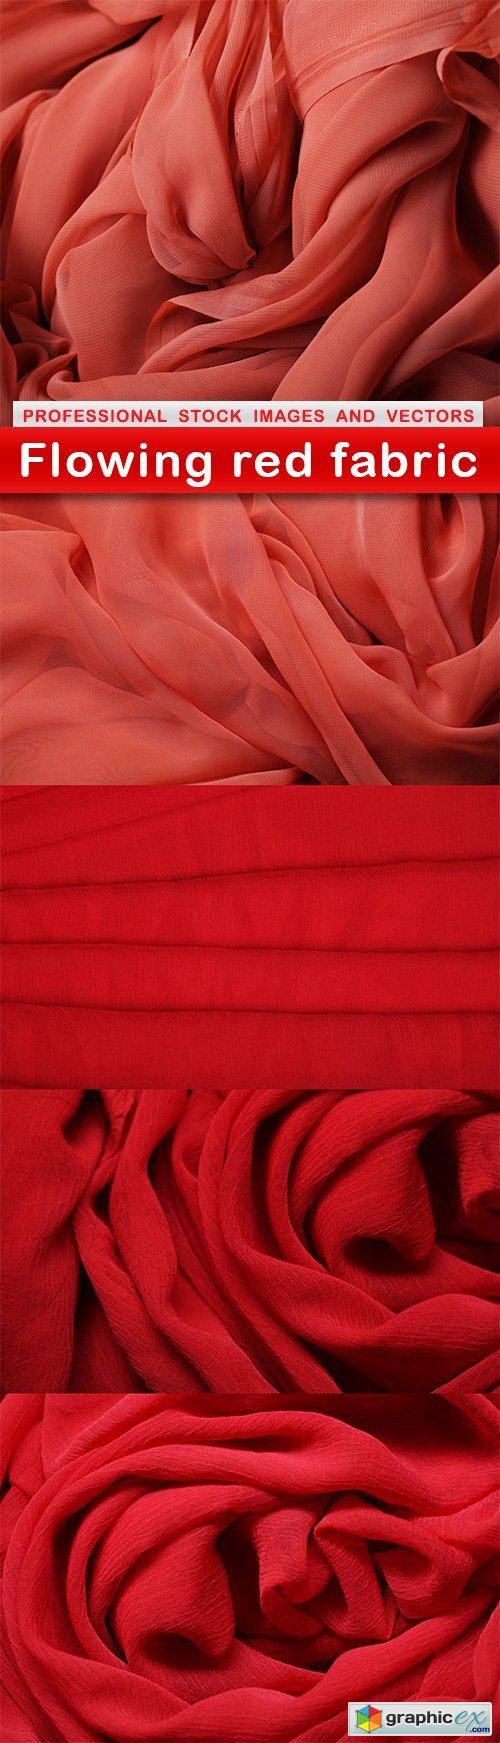 Flowing red fabric - 5 UHQ JPEG